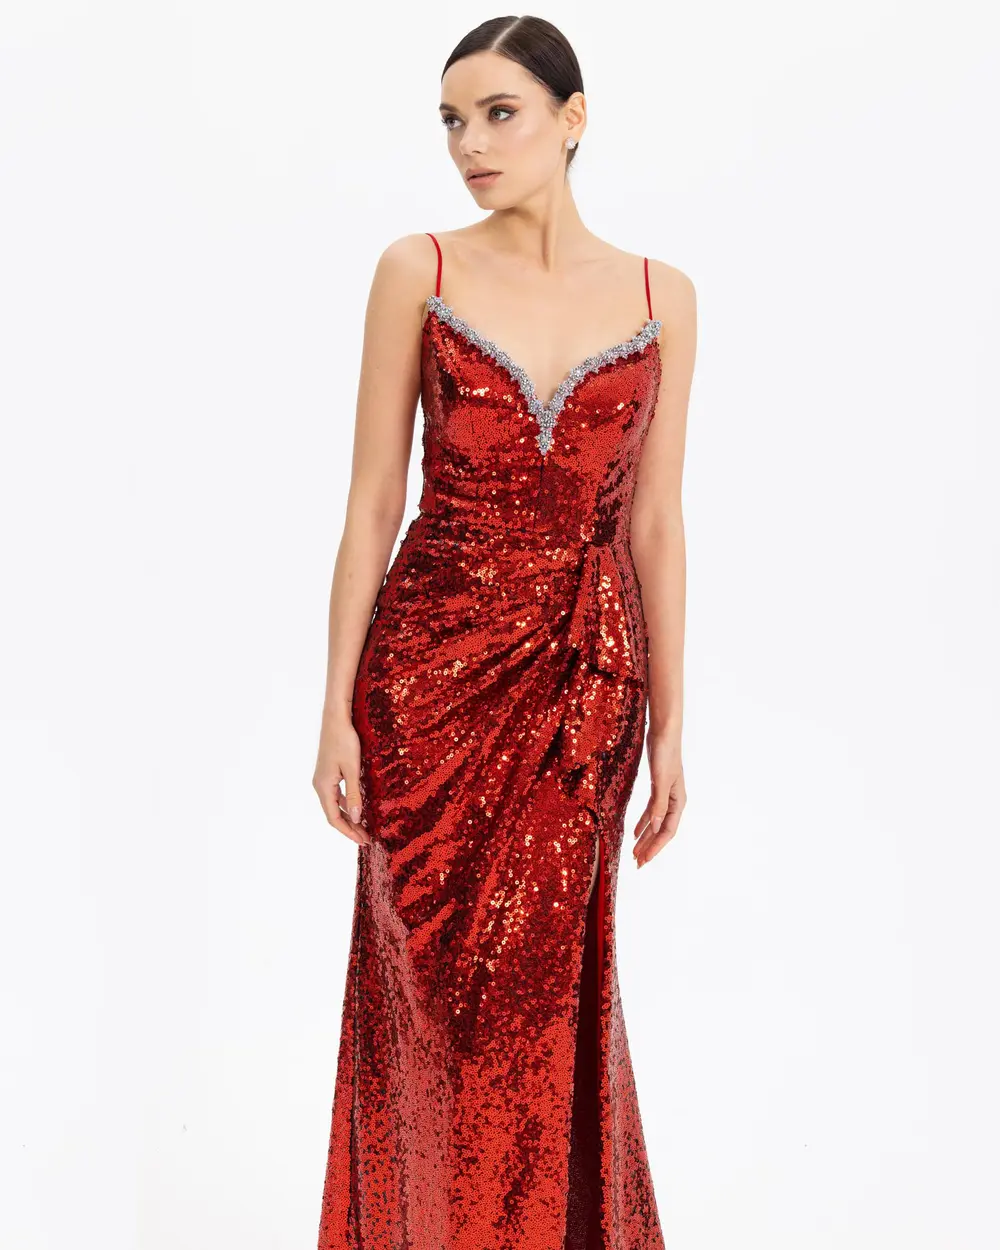  STONE EMBROIDERED SEQUIN EVENING DRESS